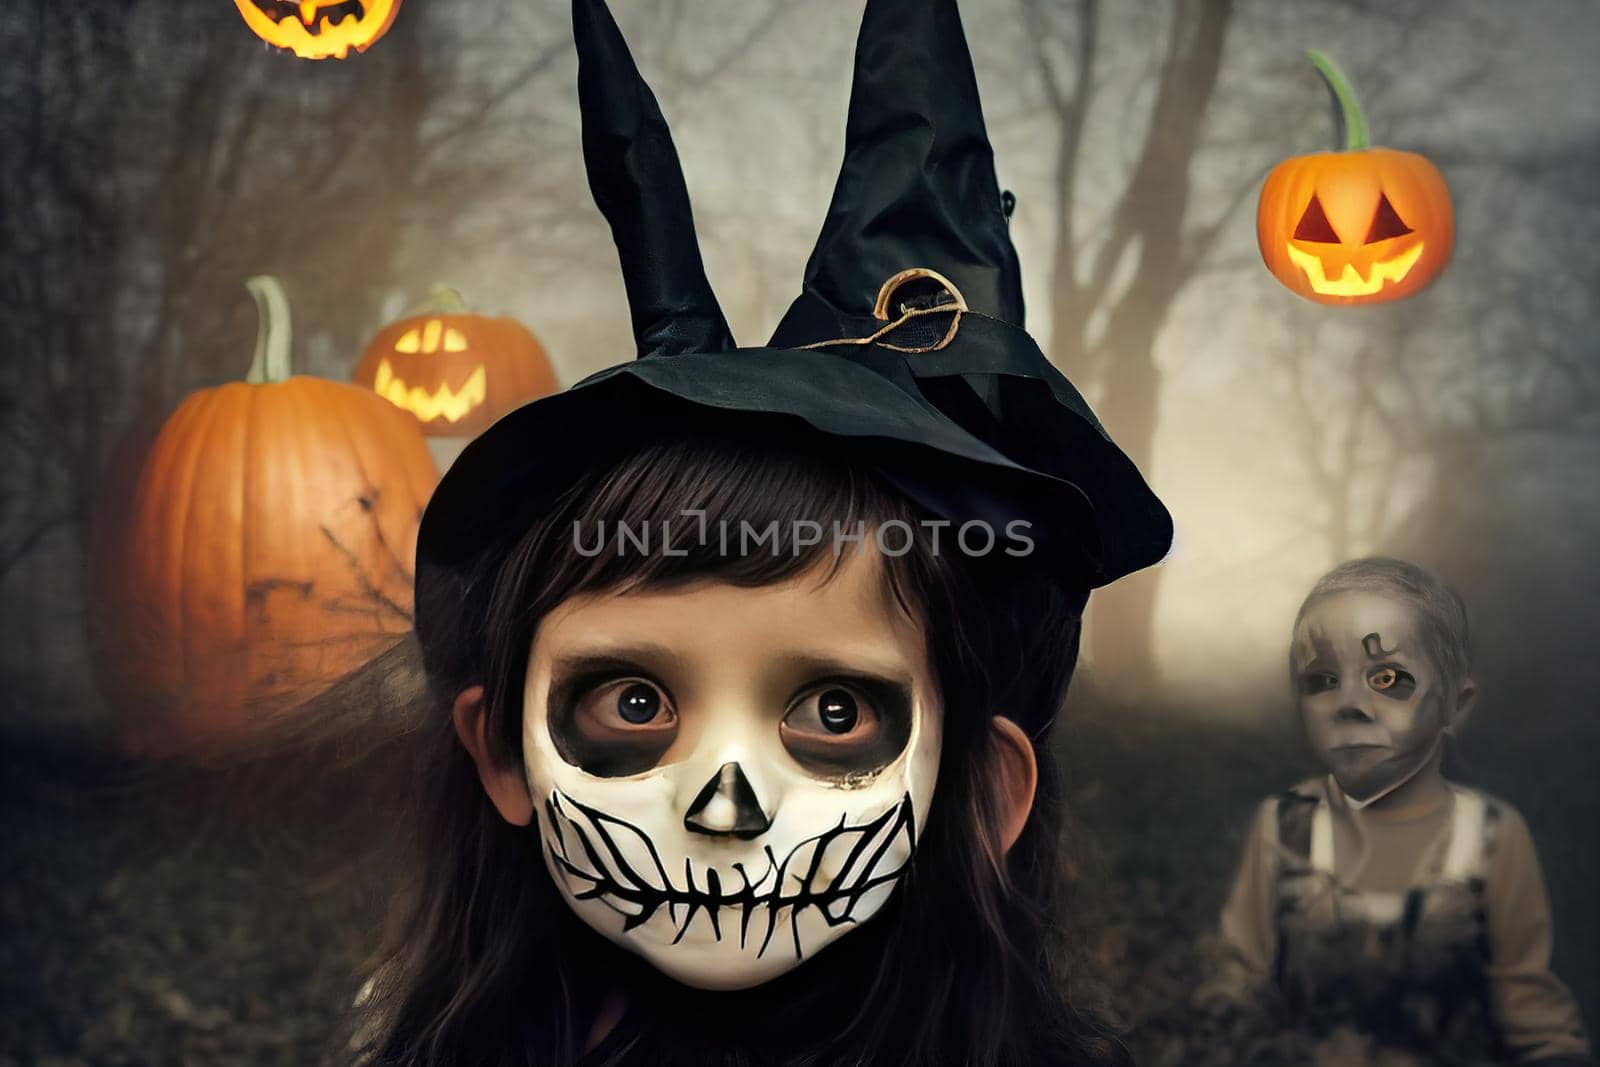 A little girl in a witch costume in a medical mask makes crafts and scares